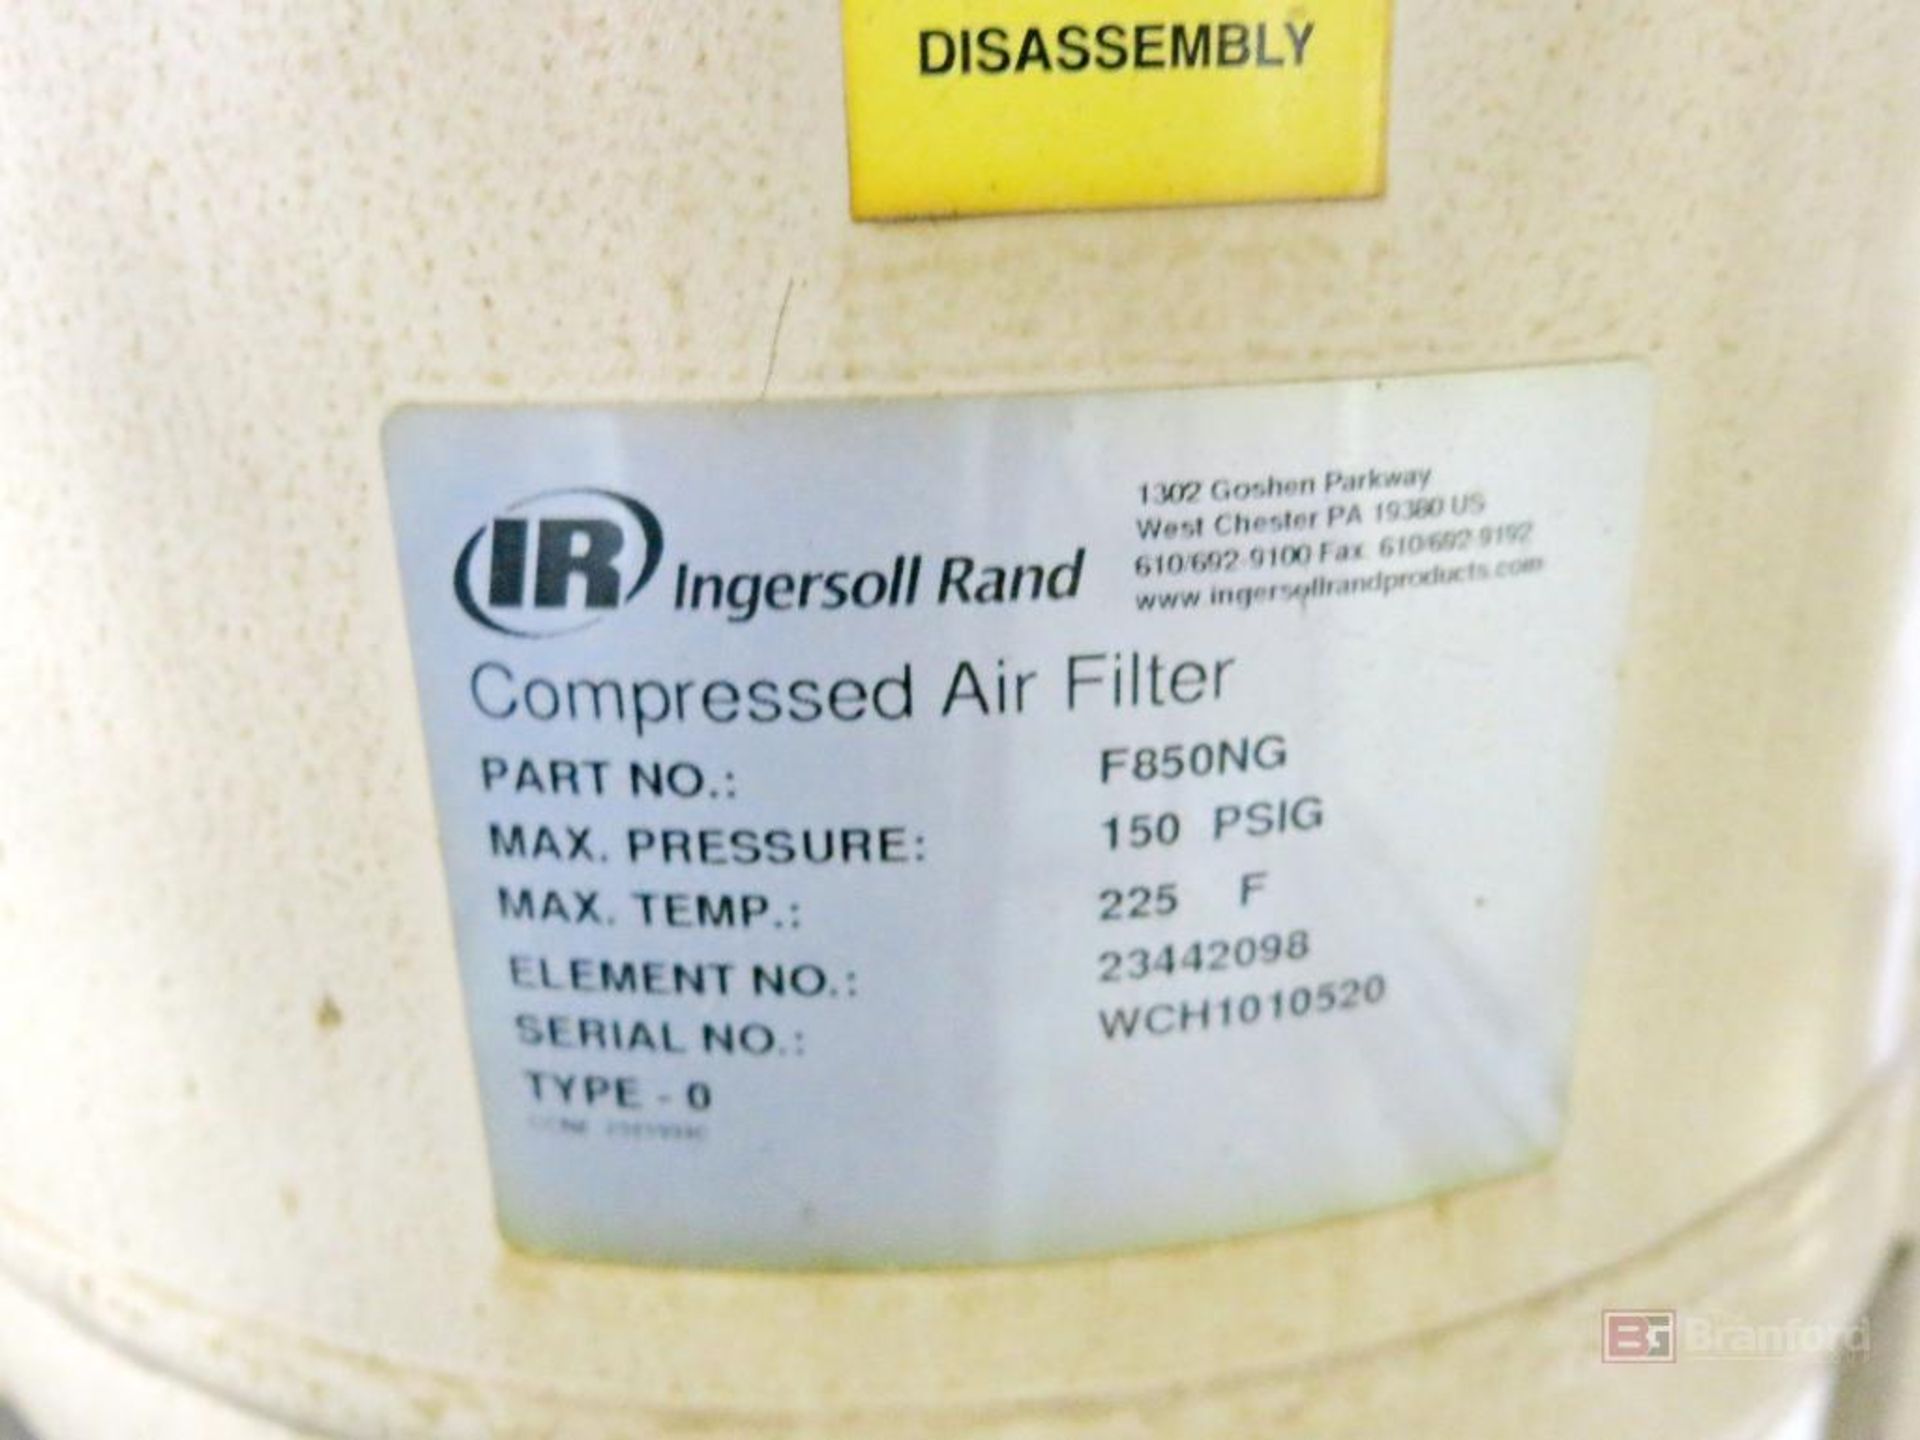 Ingersoll Rand Compressed Air Filter - Image 2 of 2